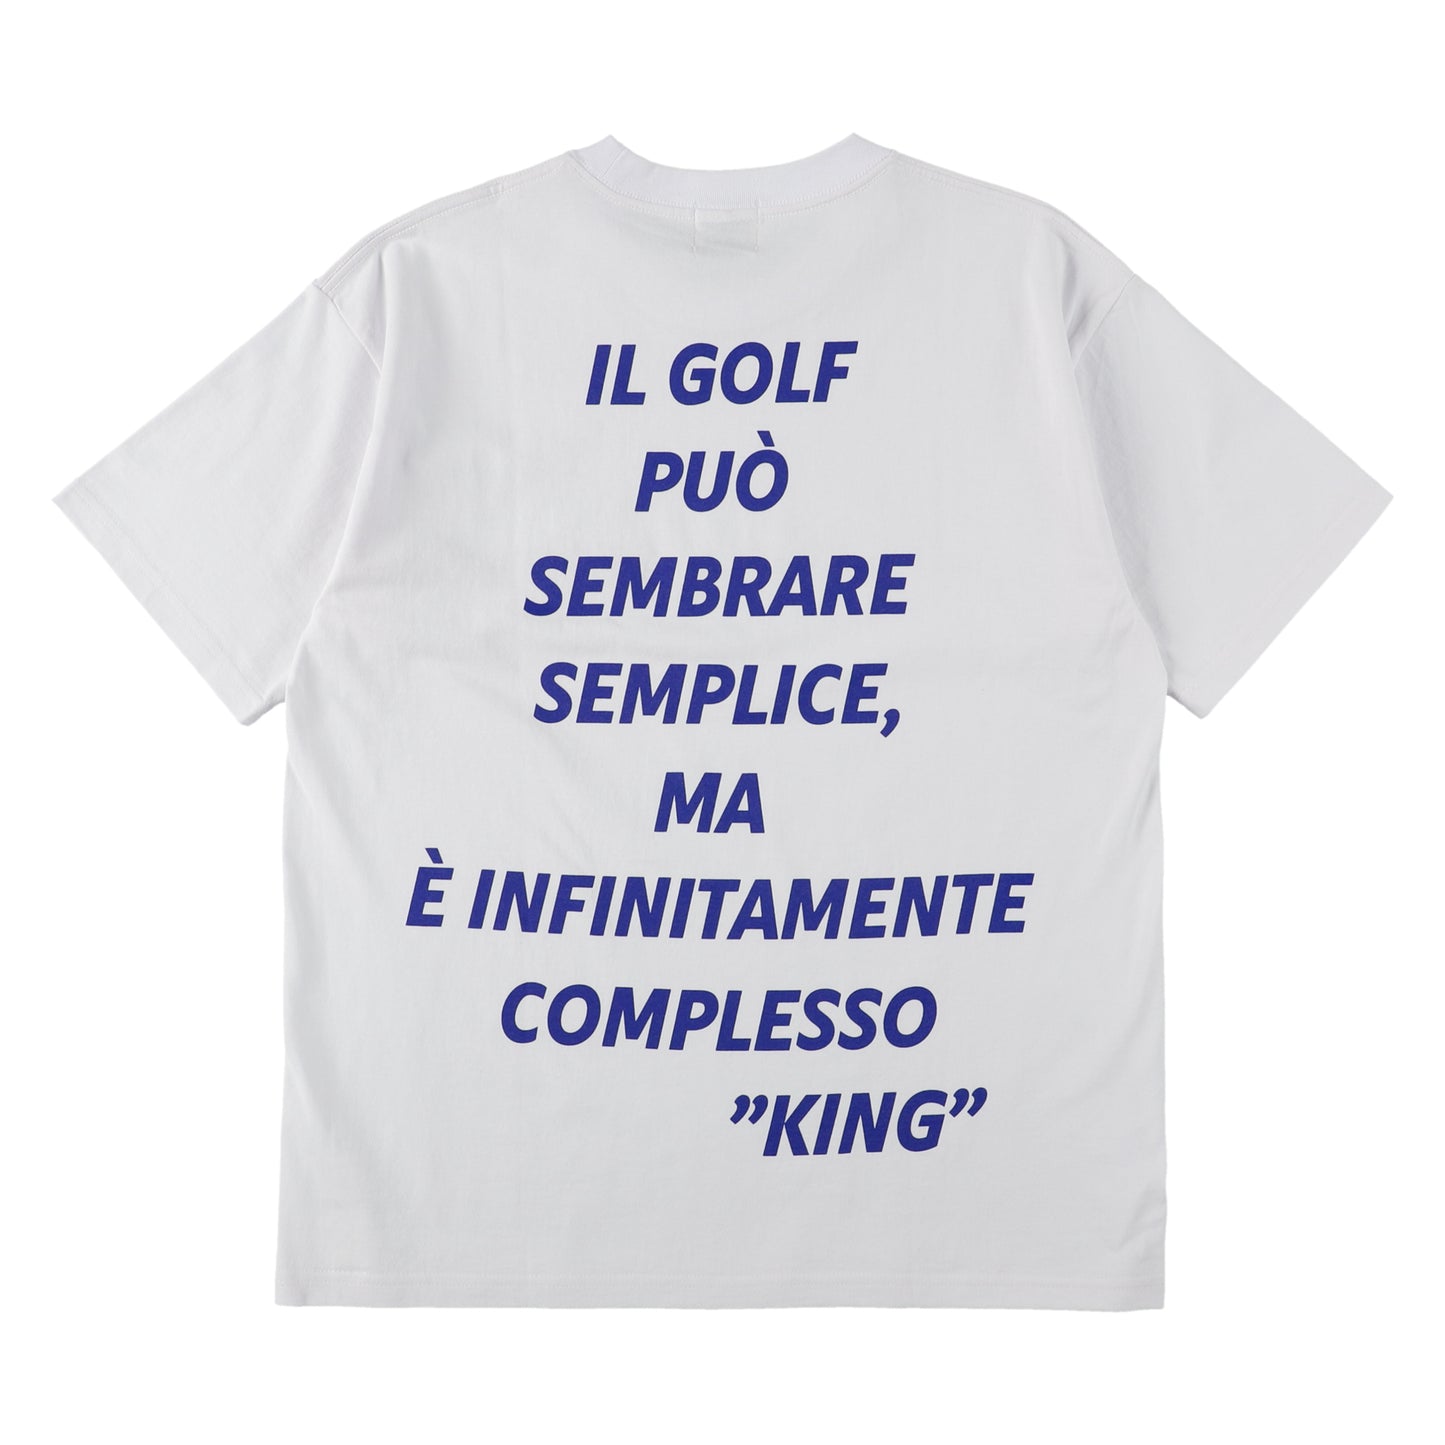 FAMOUS QUOTE Tee  " King "